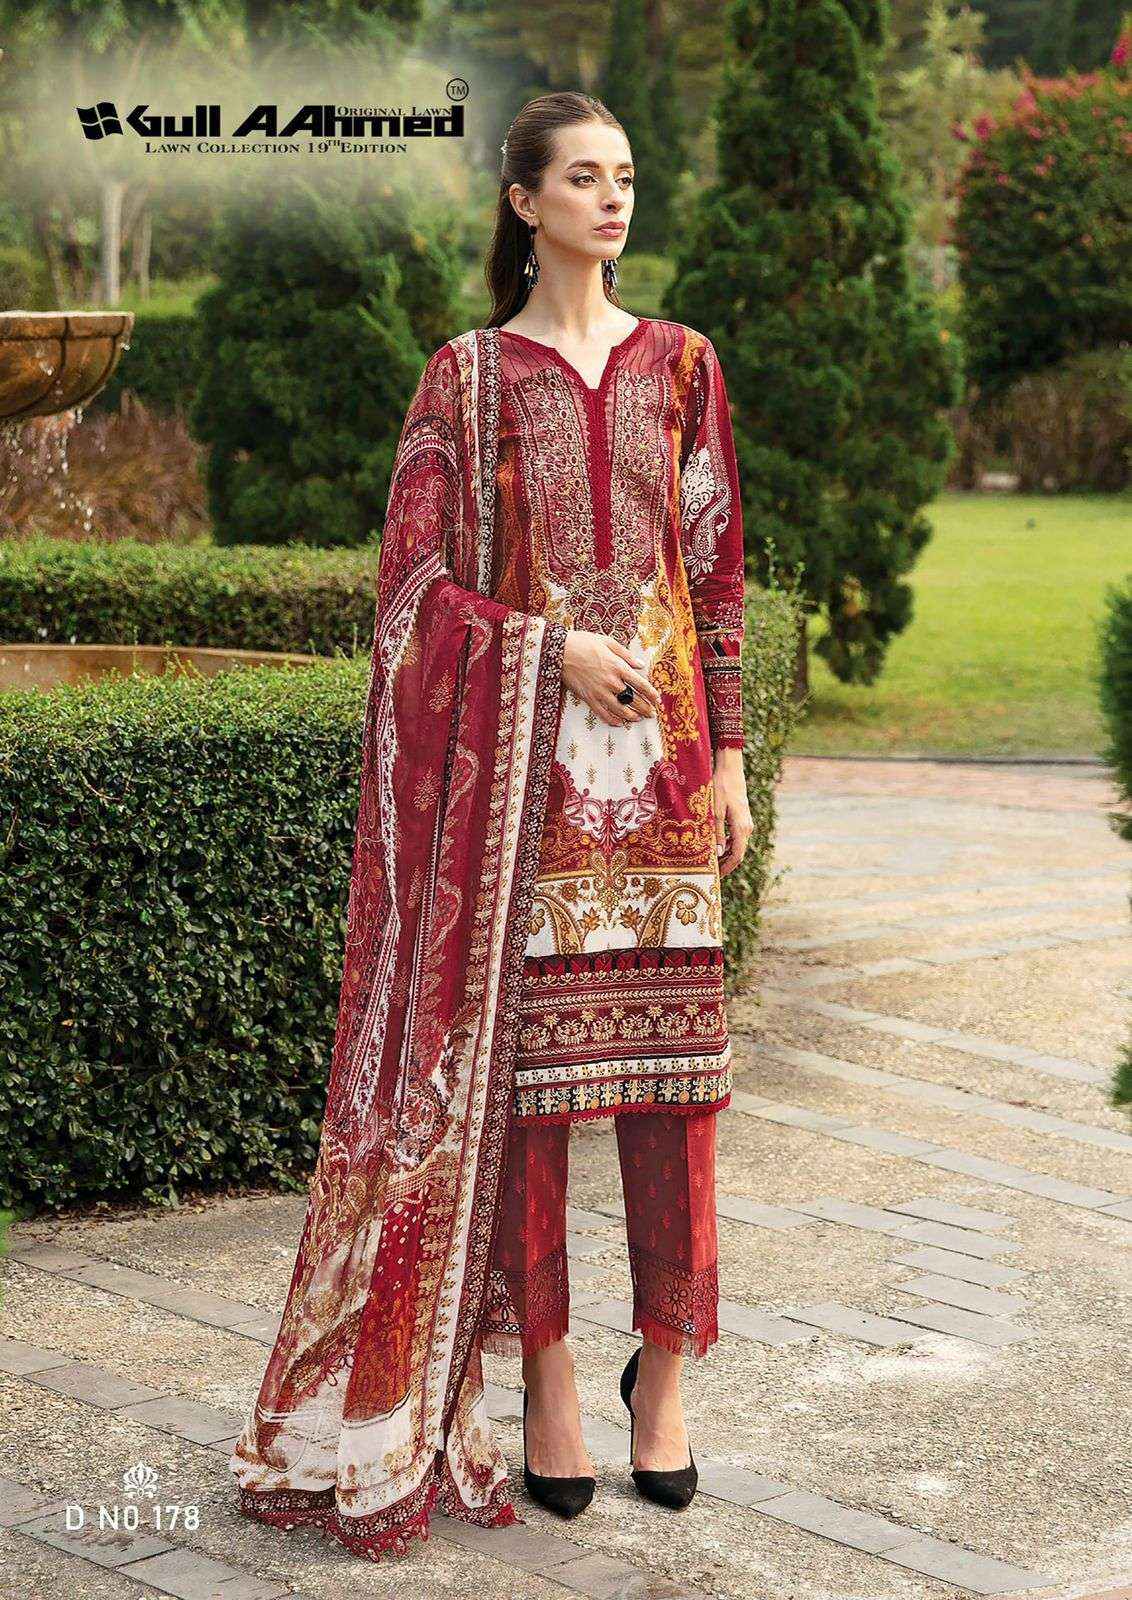 Gull Aahmed Lawn Collection Vol 19 Lawn Cotton Dress Material 6 pcs Catalogue